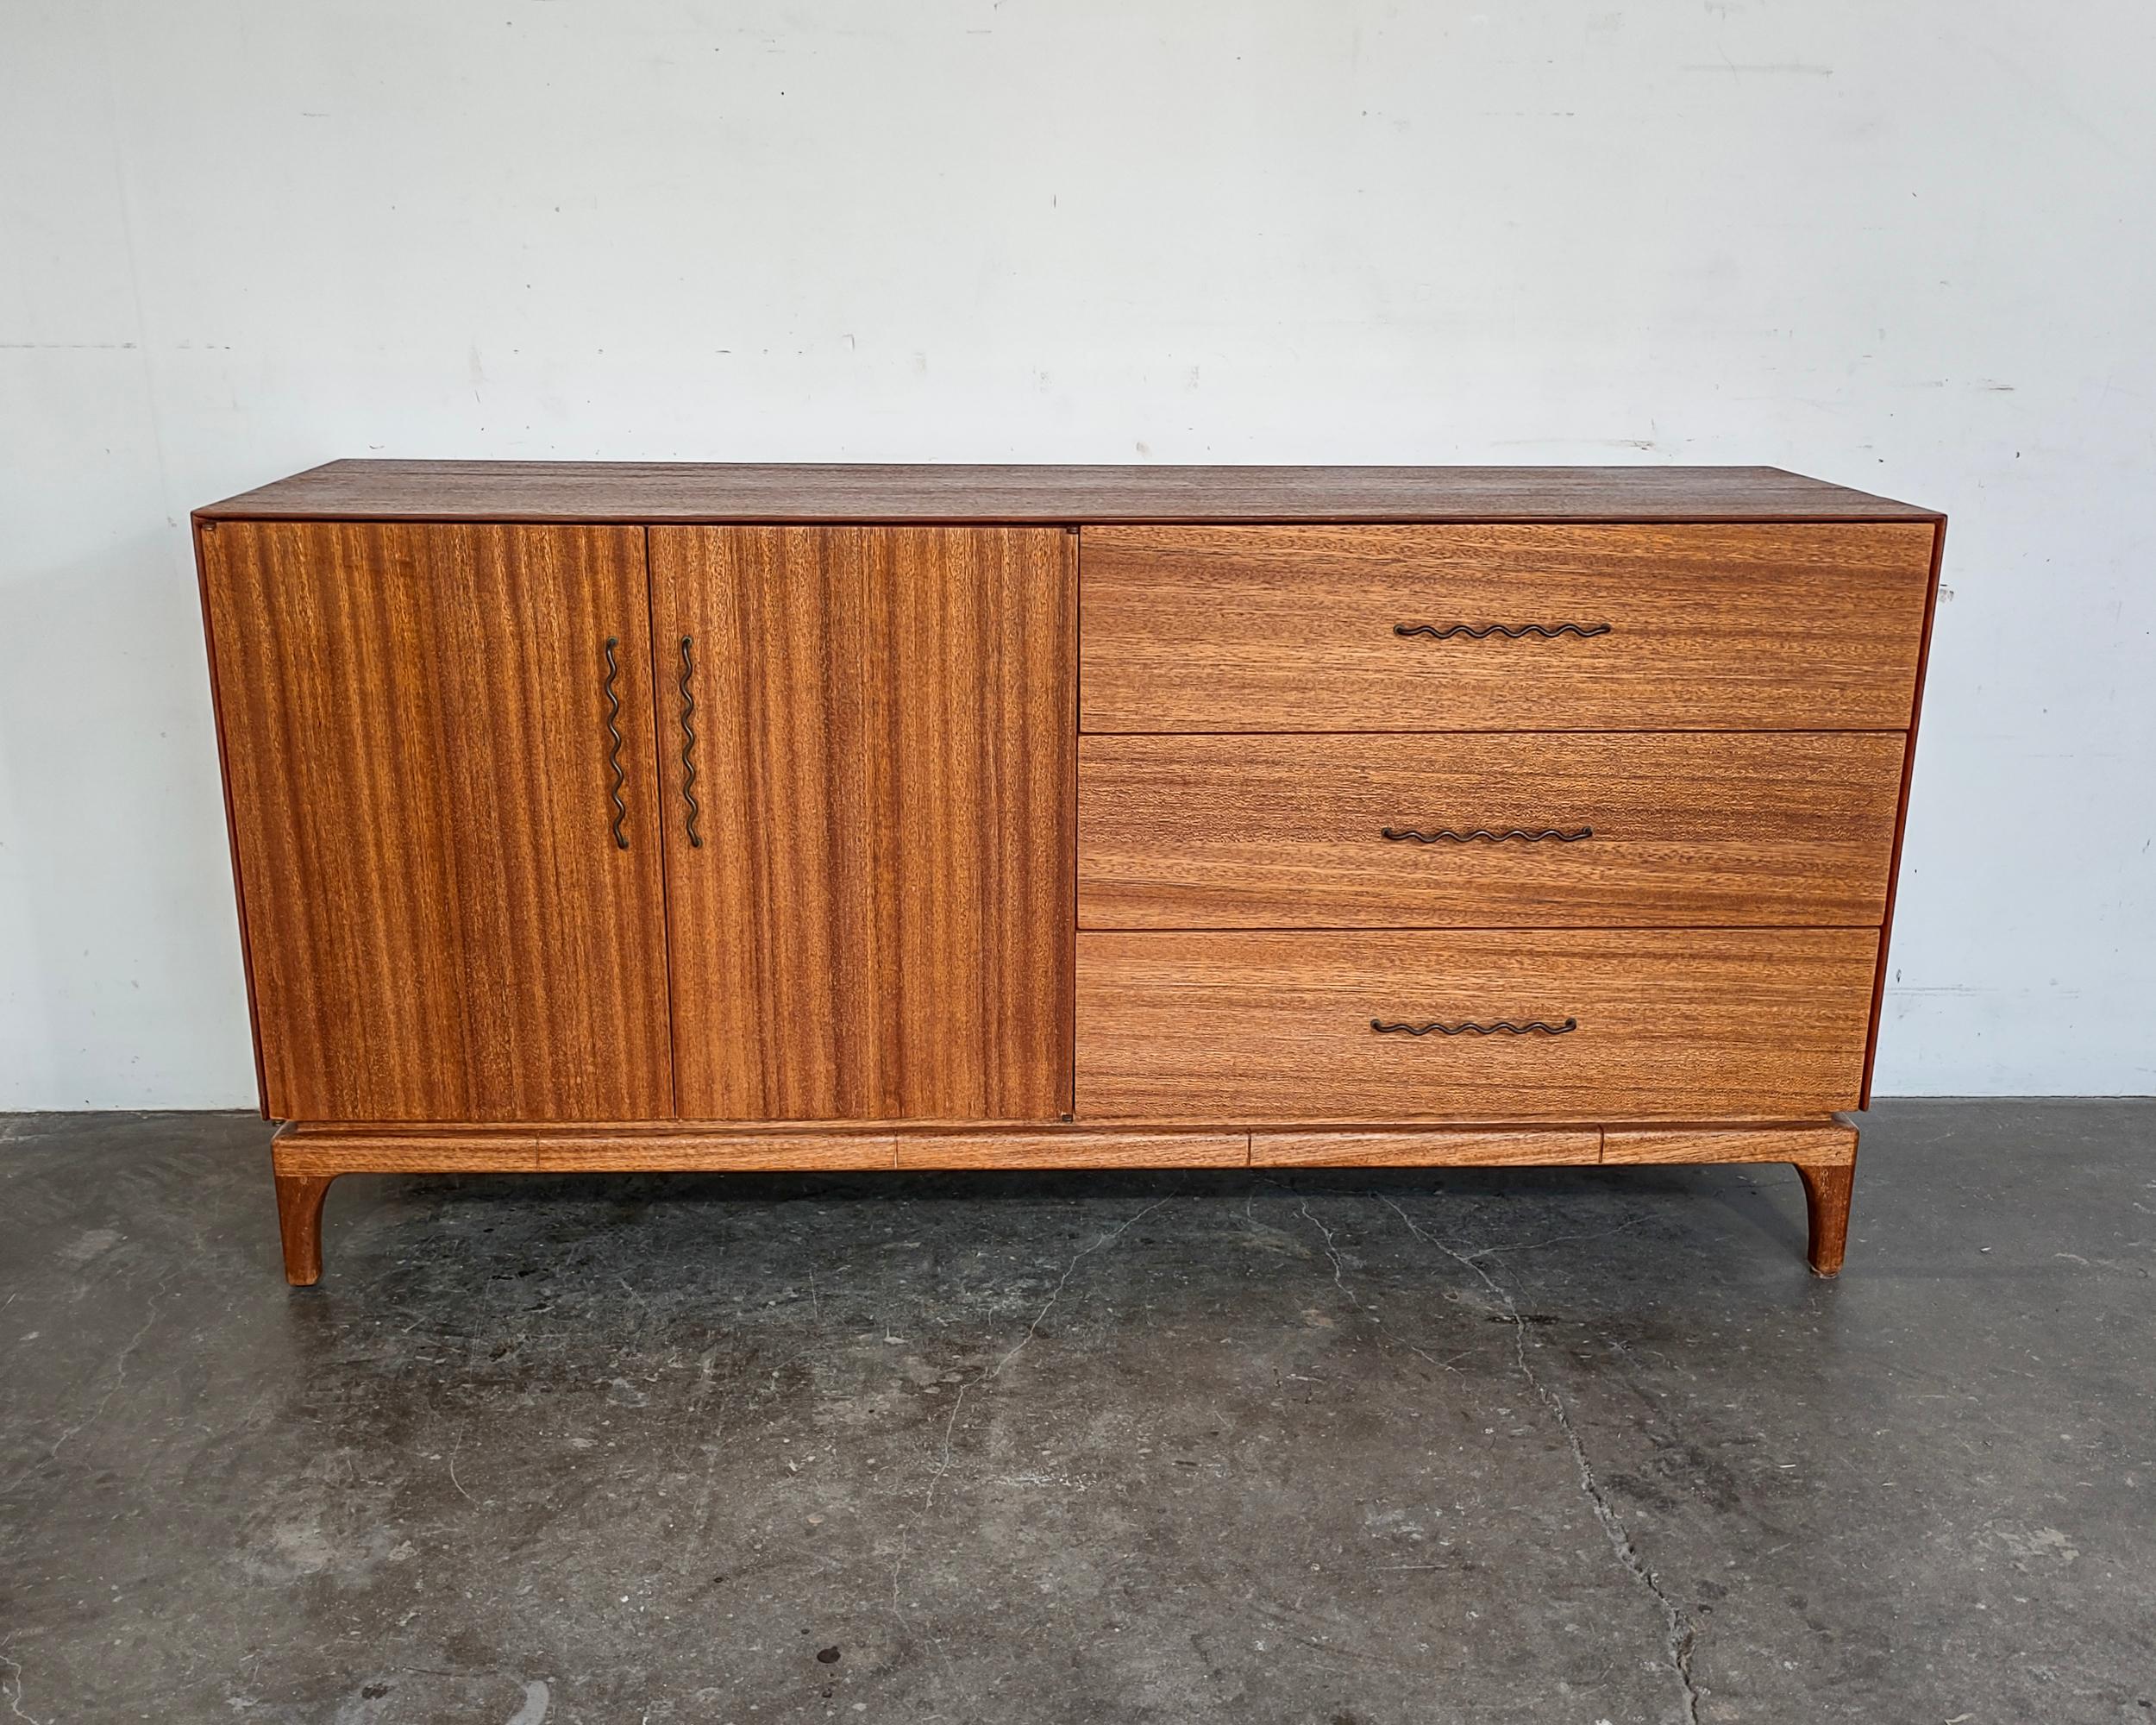 Completely restored 1960s mahogany wood credenza designed by John Keal for Brown Saltman. Stunning wood grain throughout complimented by bronze squiggle pulls. The piece features a cabinet on the left with an adjustable shelf and three drawers on